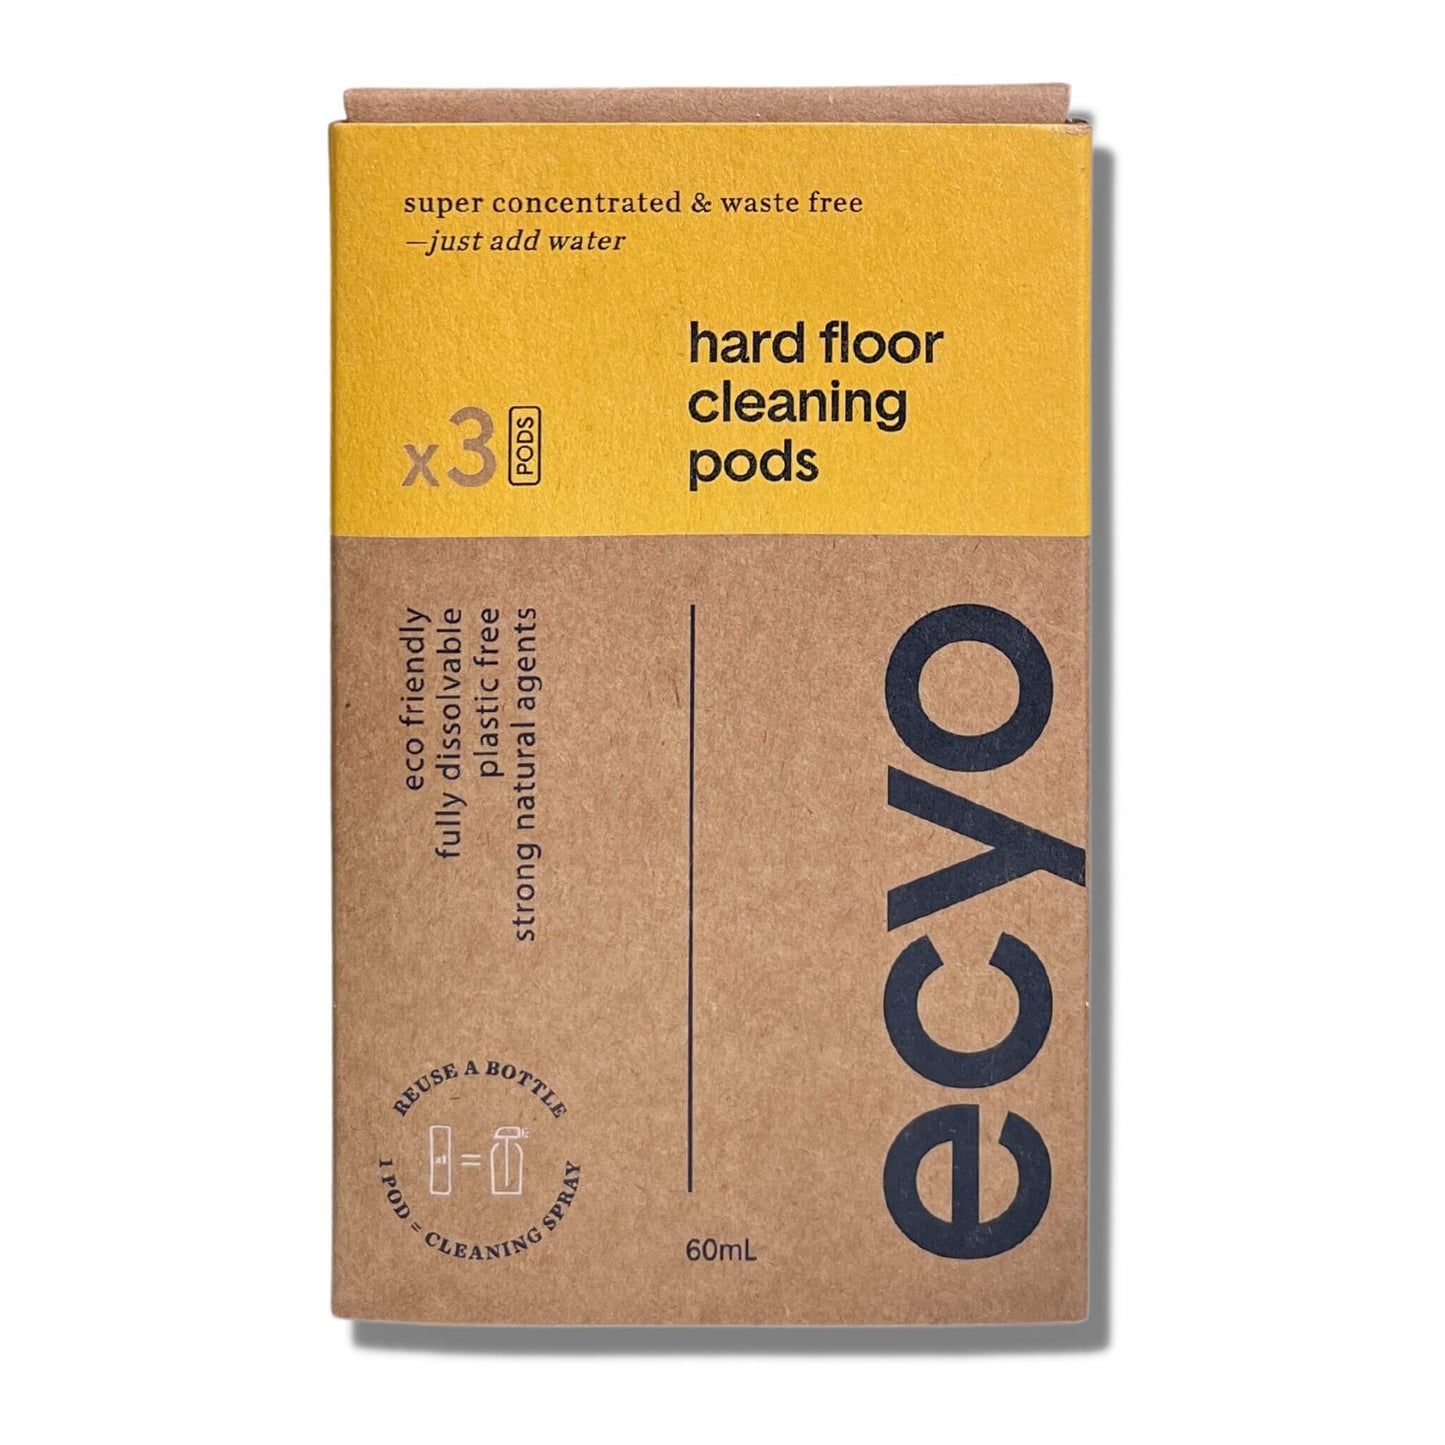 ecyo disolving cleaning pods - hard floor cleaning x 3